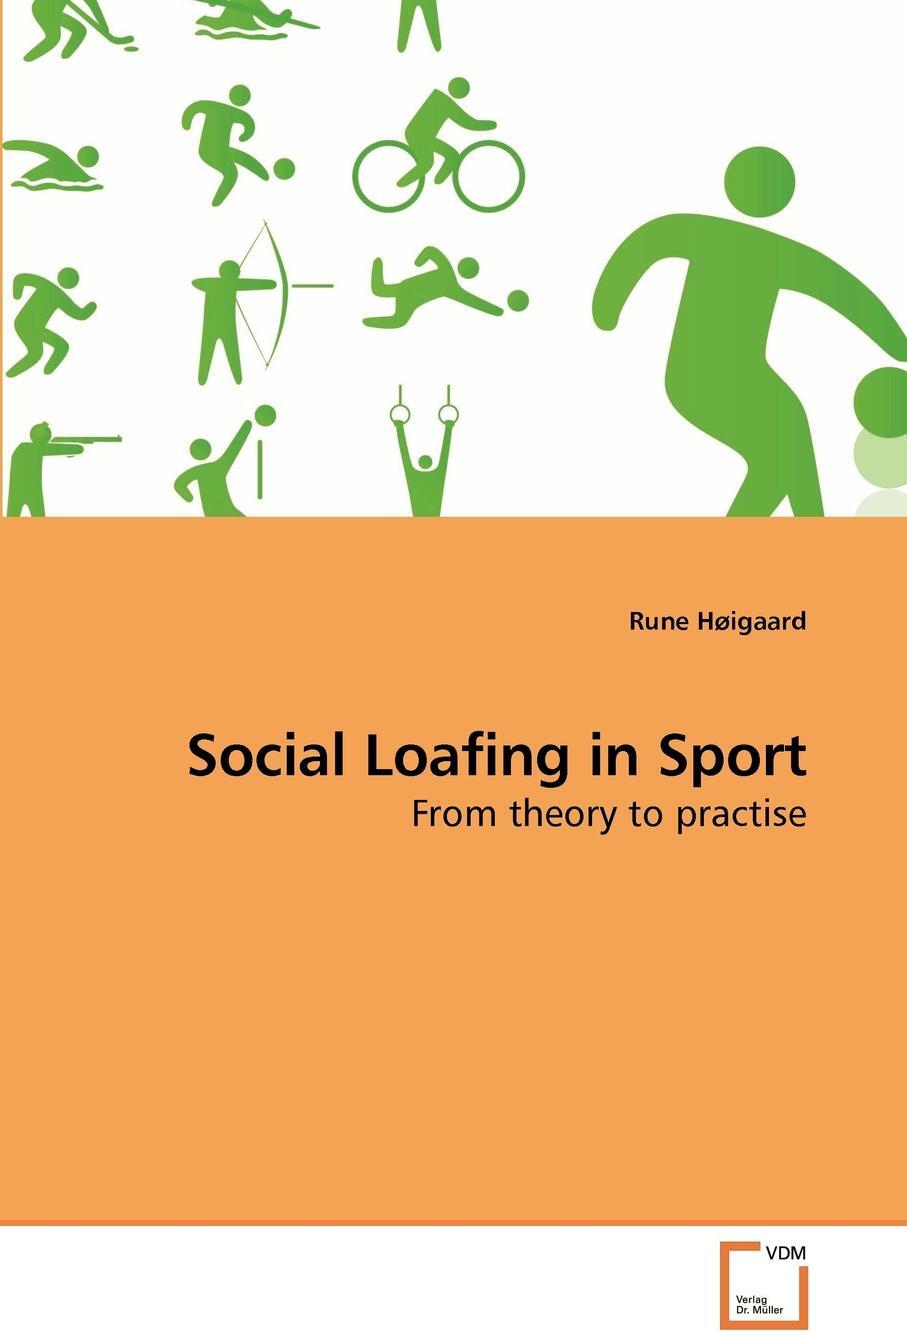 Social Loafing. From Theory to Practice. If practise Sports, i.